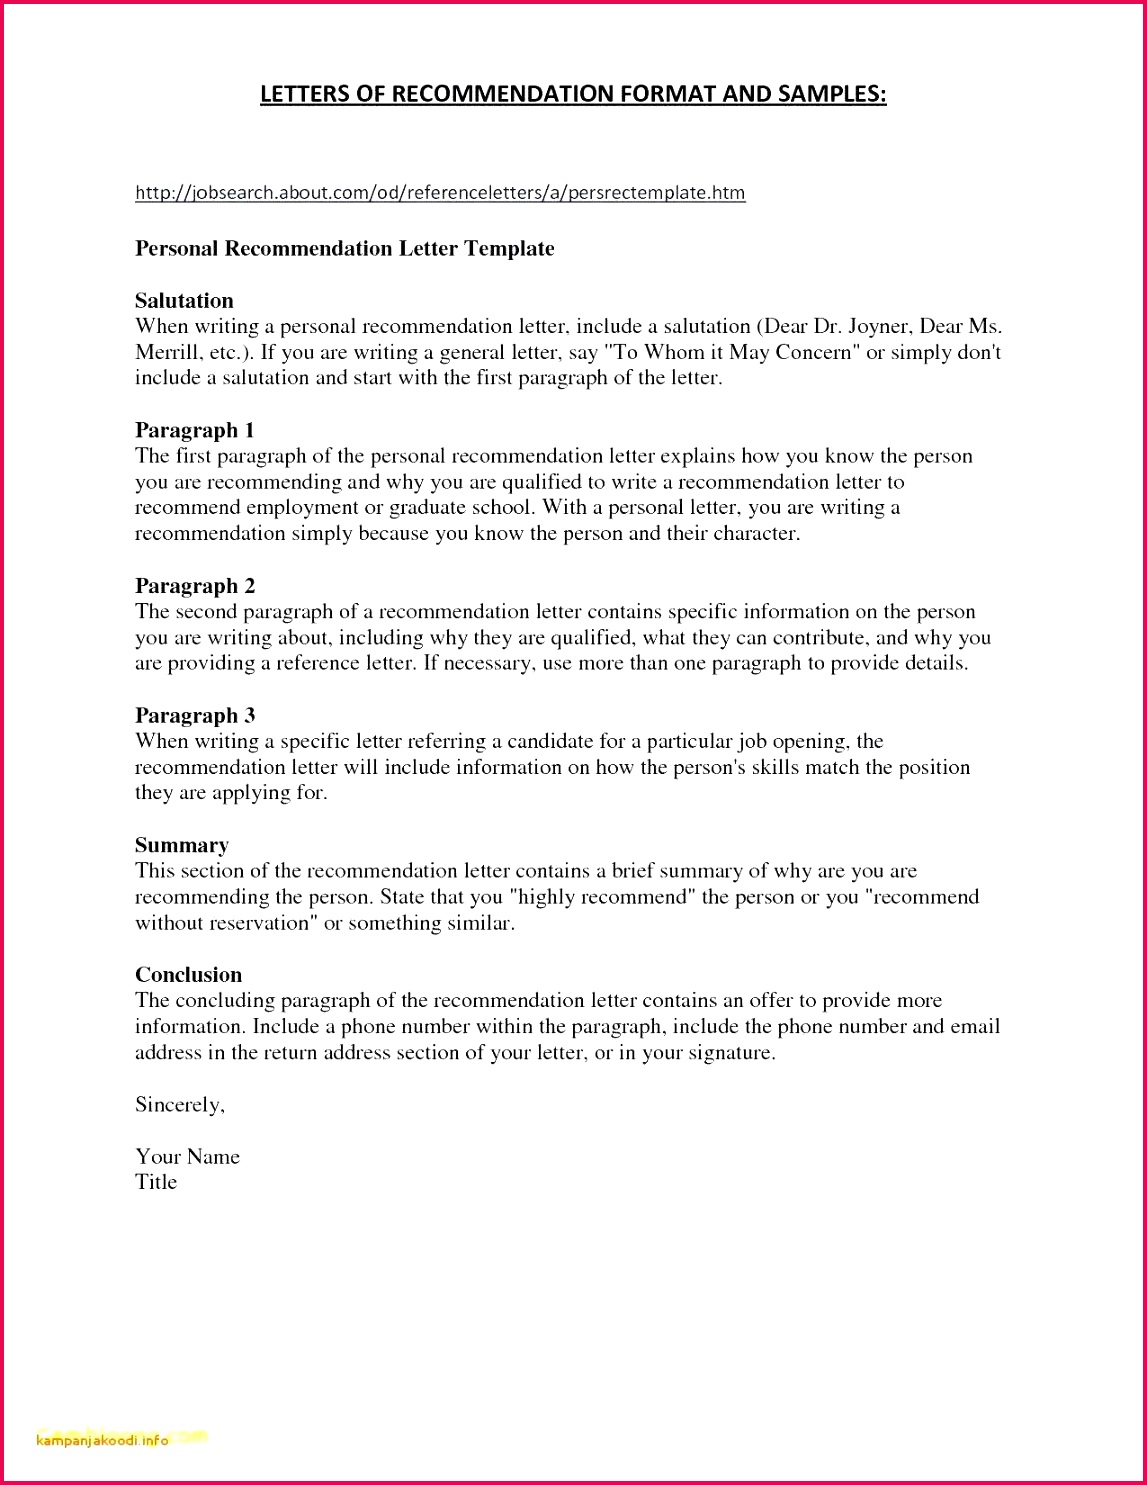 Hairstyles Proof Employment Letter For Visa 25 Amazing Proof Employment Letter Template Visa New Certificate Employment Proof Employment